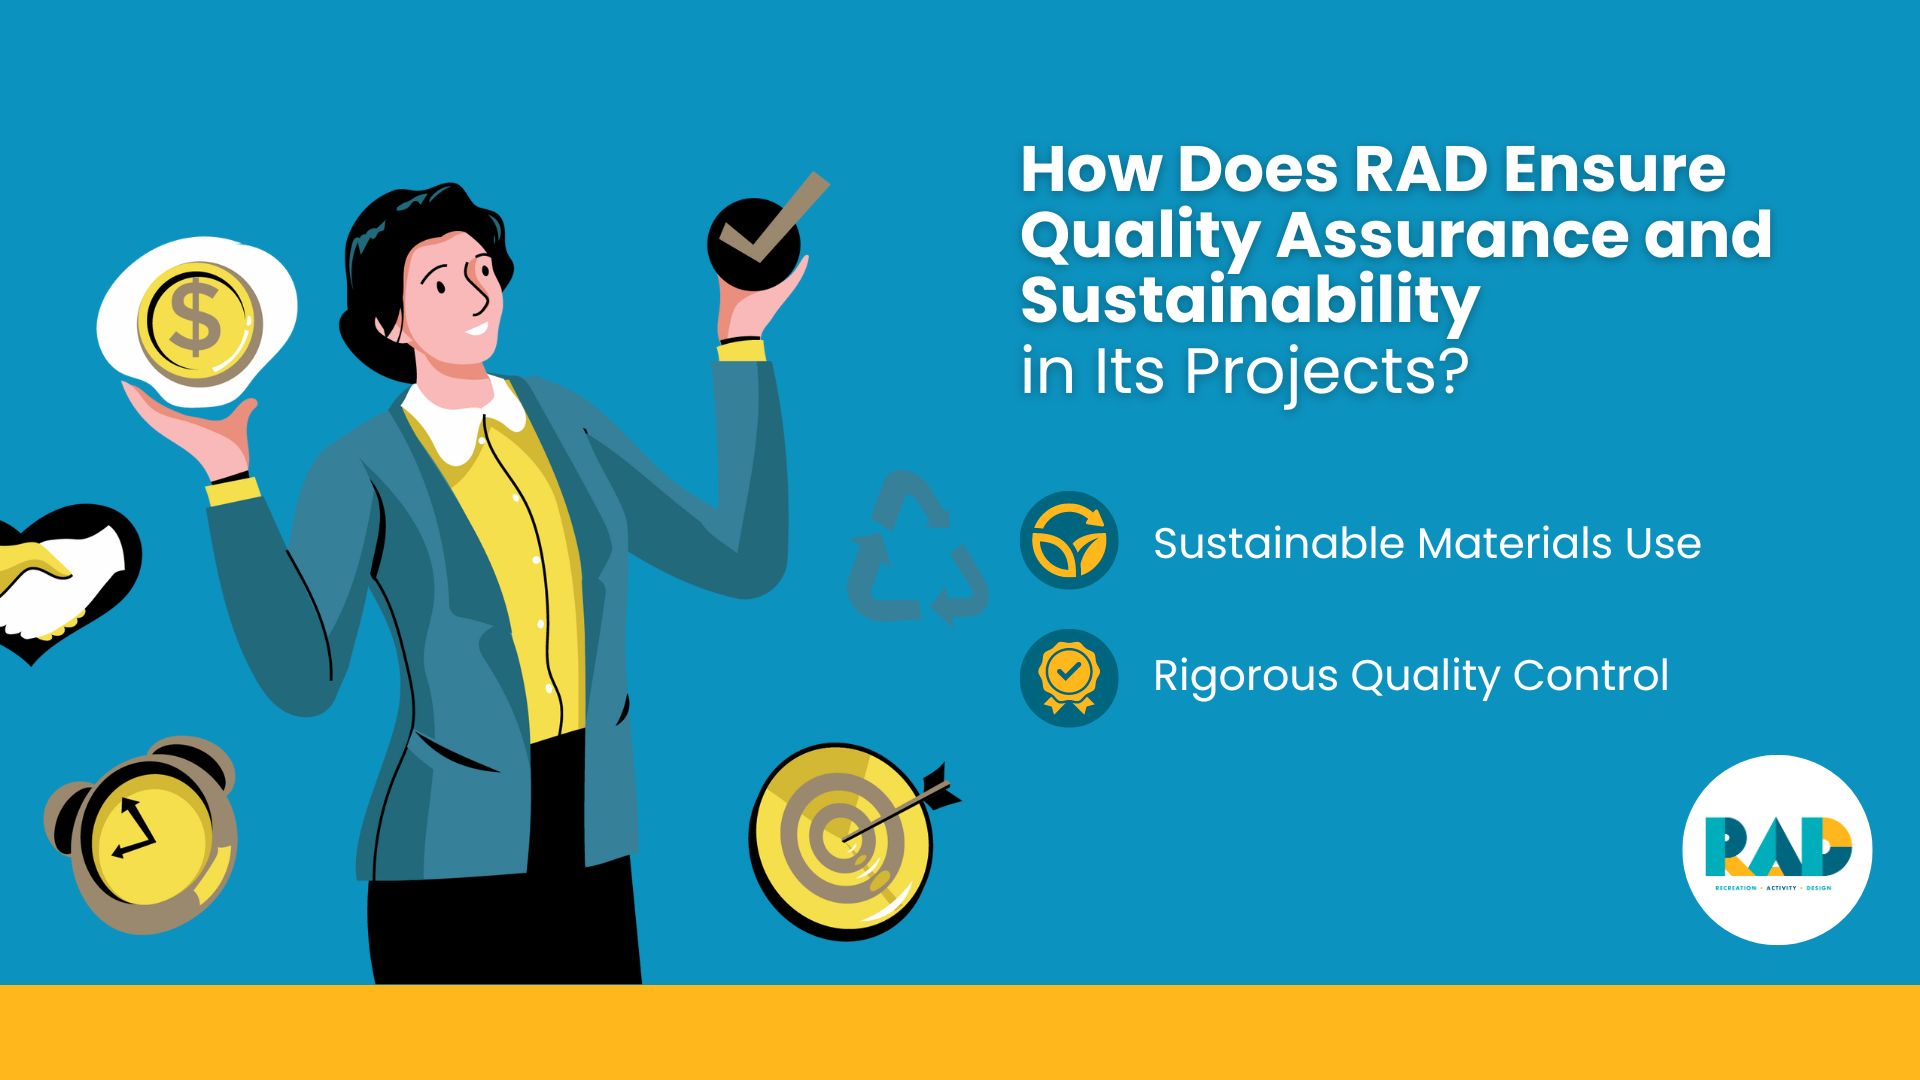 How Does RAD Ensure Quality Assurance and Sustainability in Its Projects?